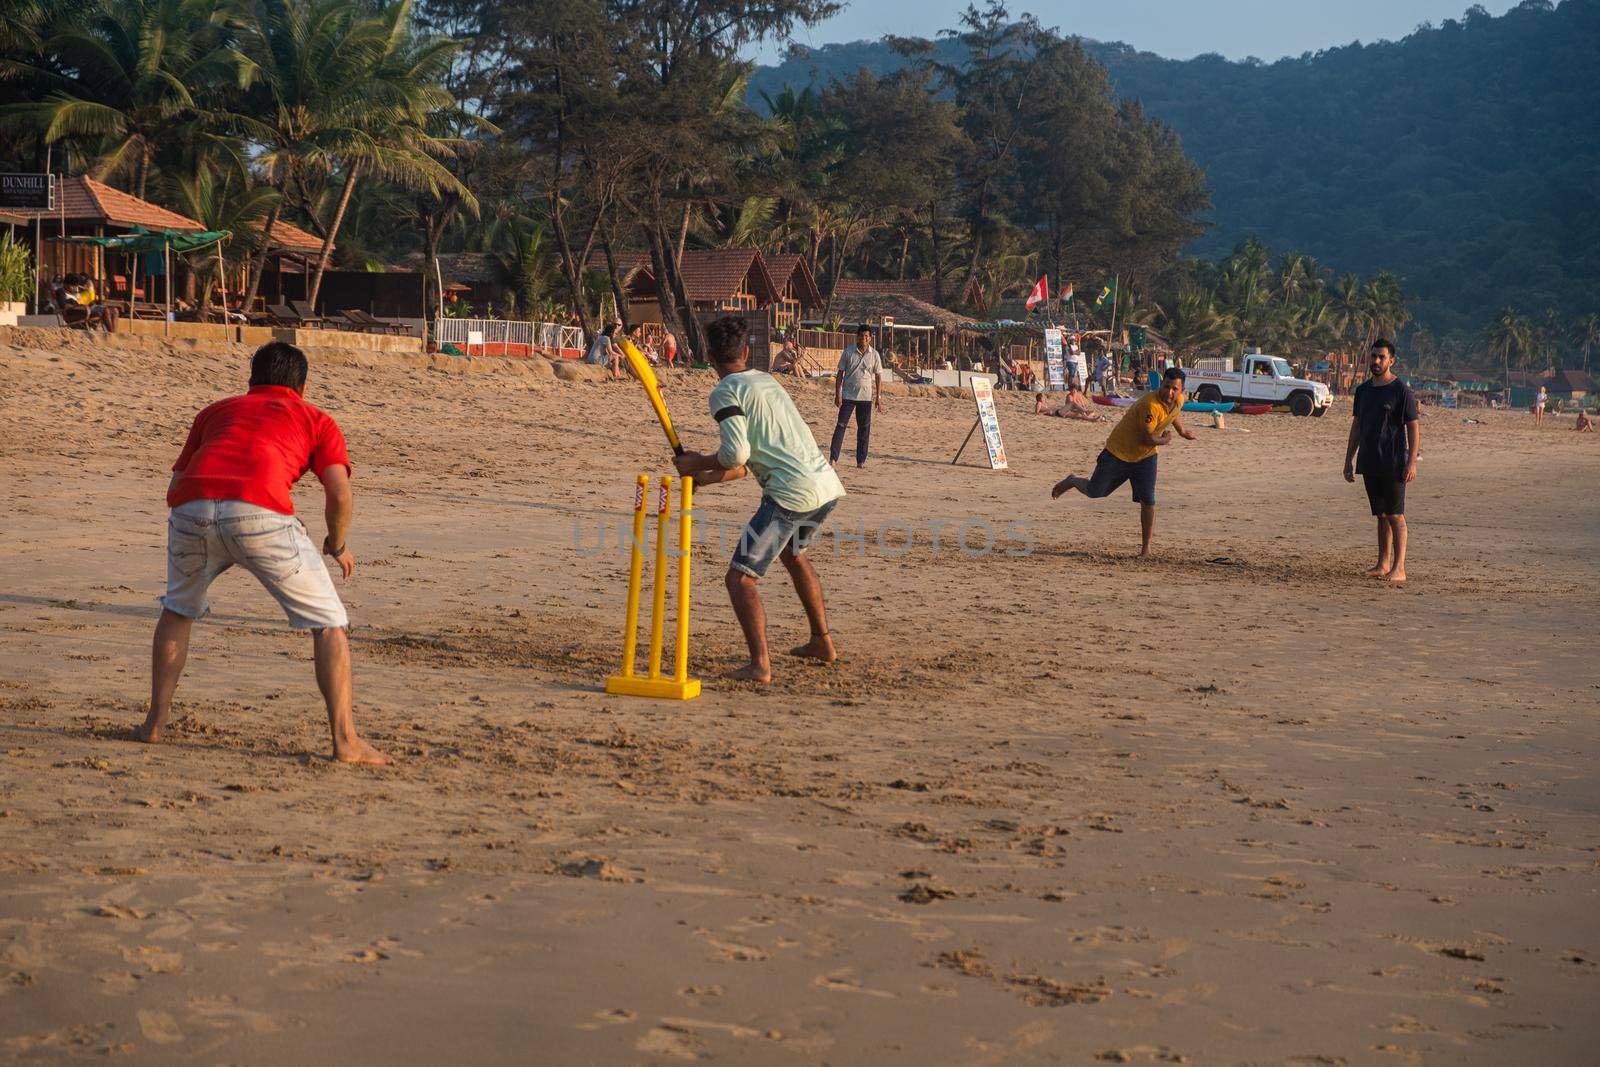 Group of Indian adults playing cricket on beach at sunset, Goa, India